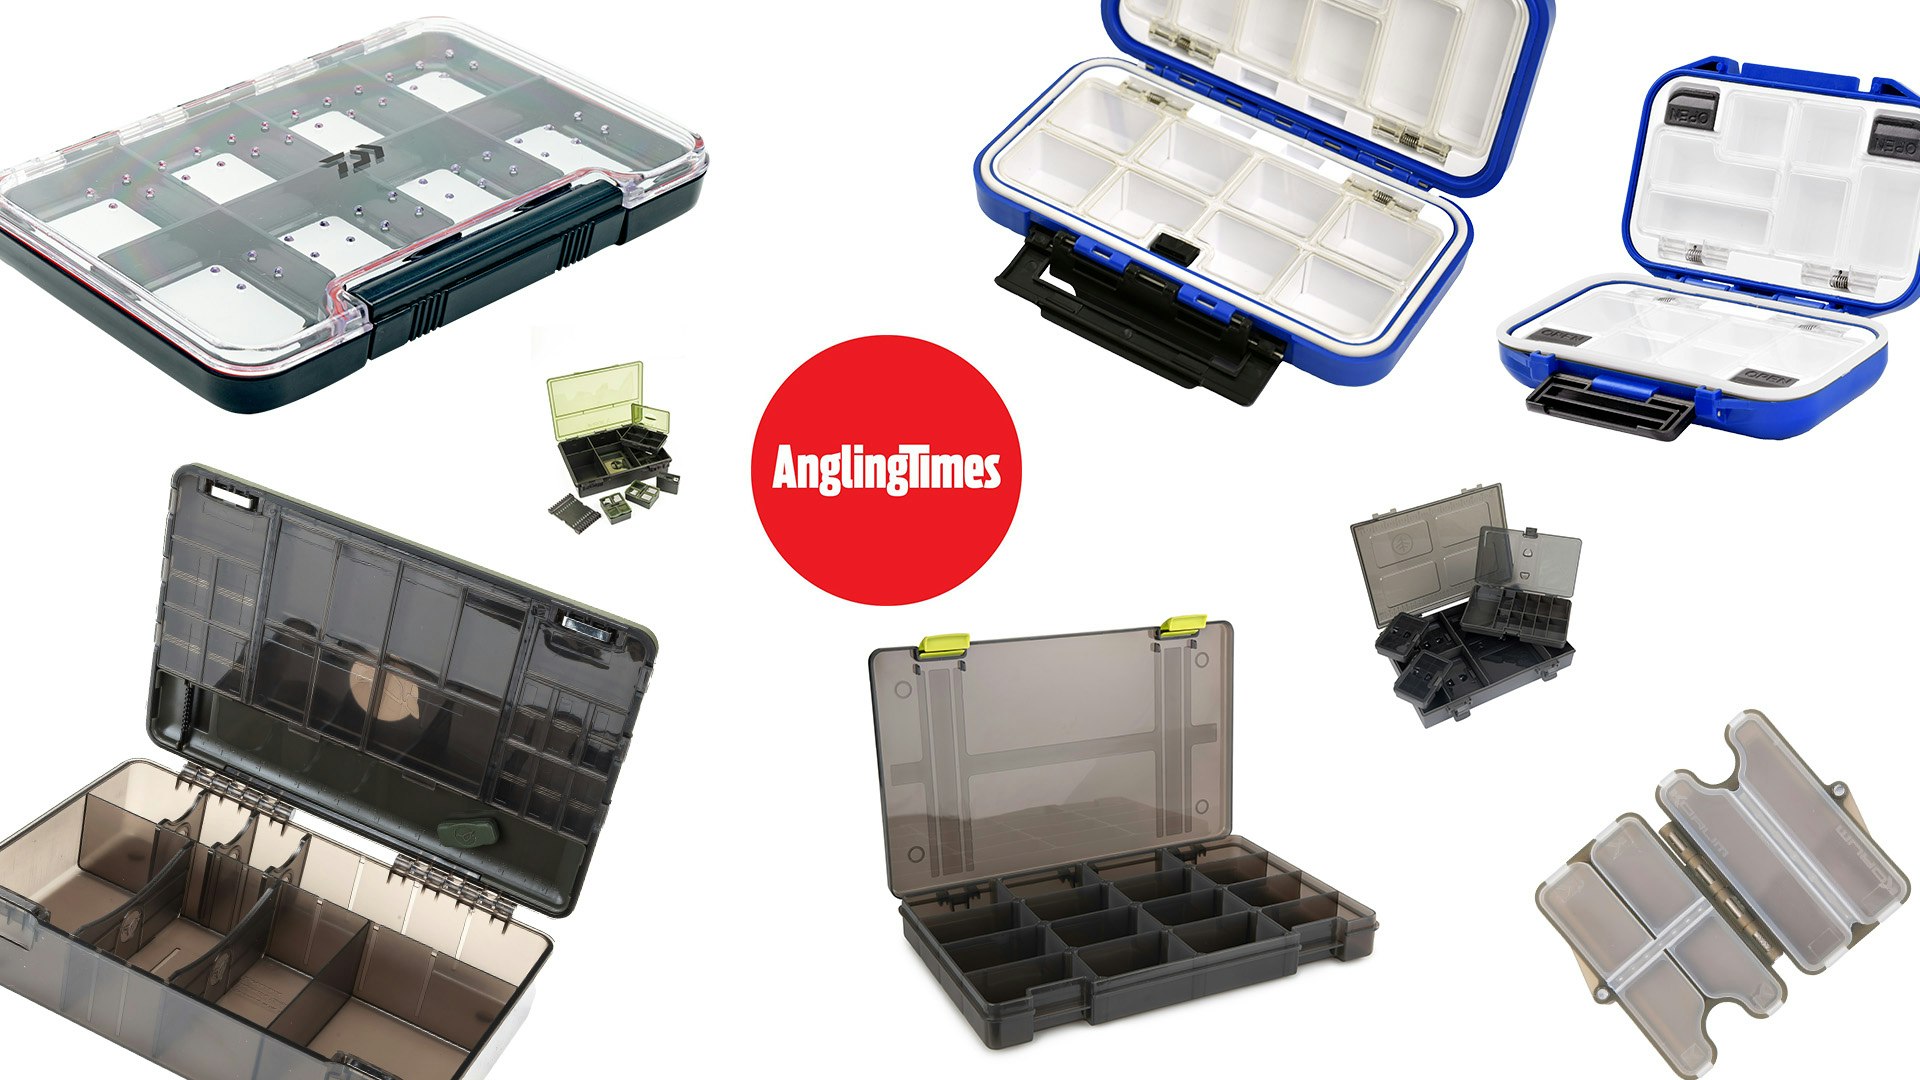 Best Fishing Tackle Storage Systems